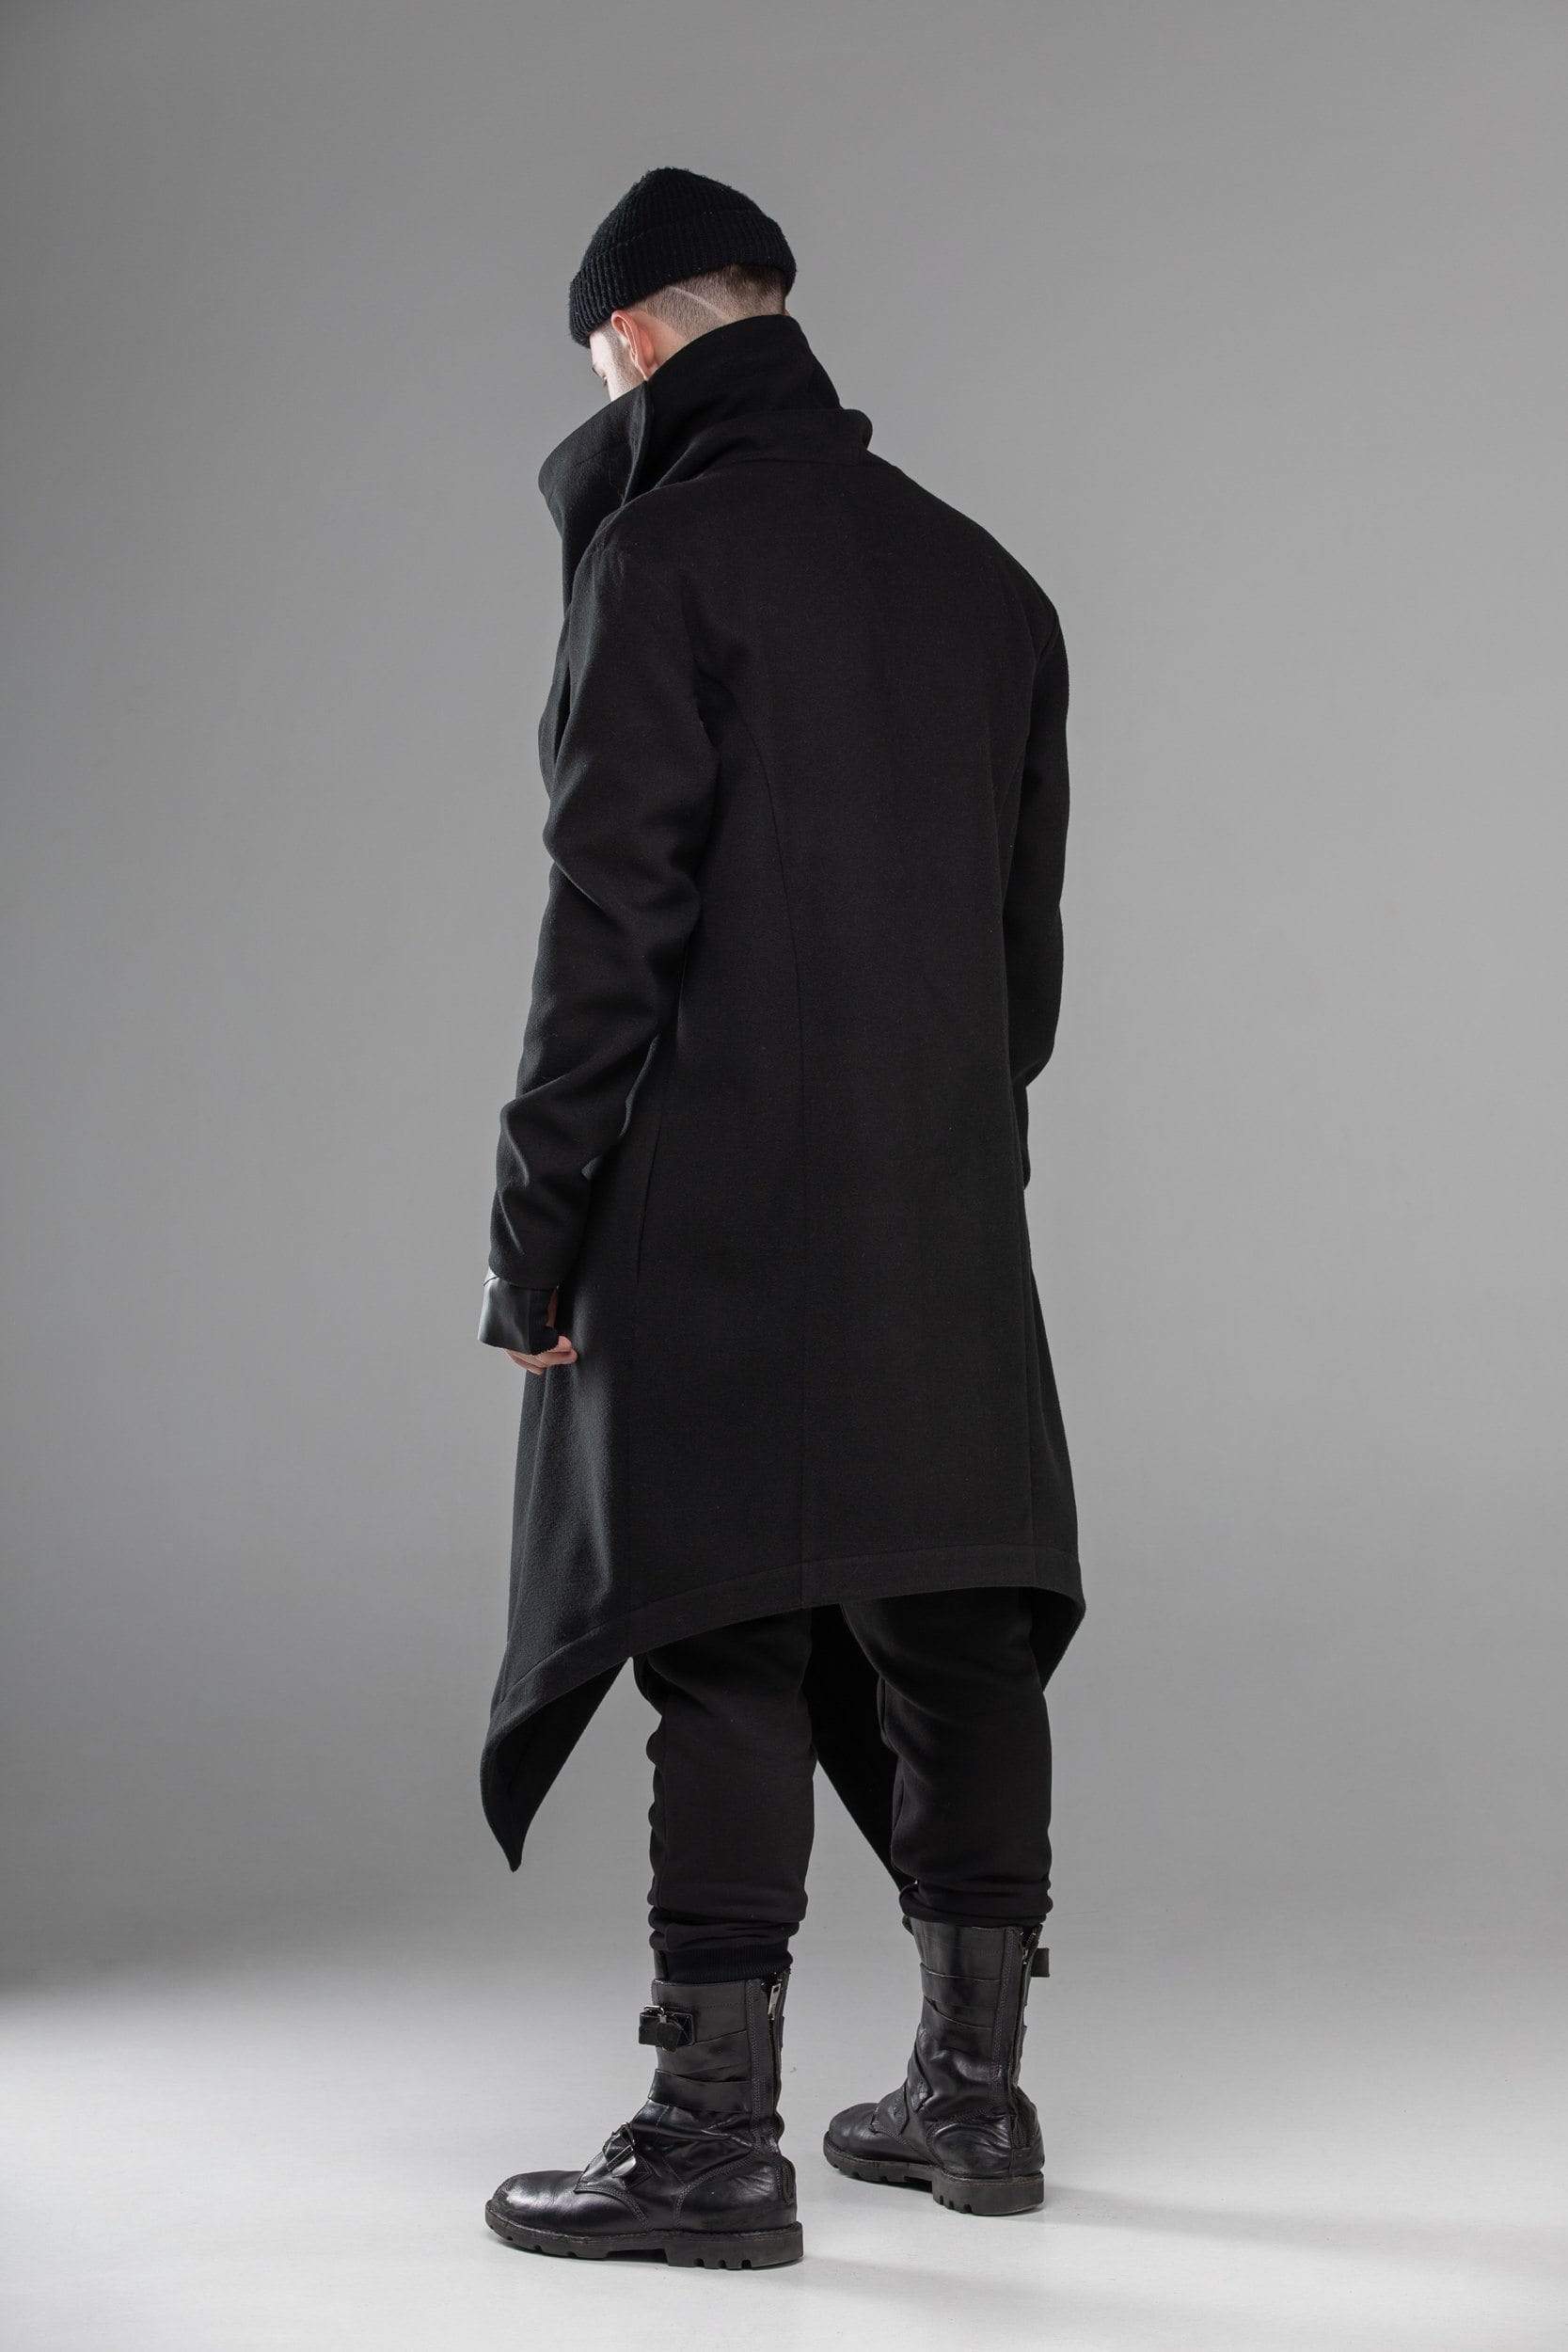 MDNT45 Coats & Jackets for Man Oversized geometric loose fit coat